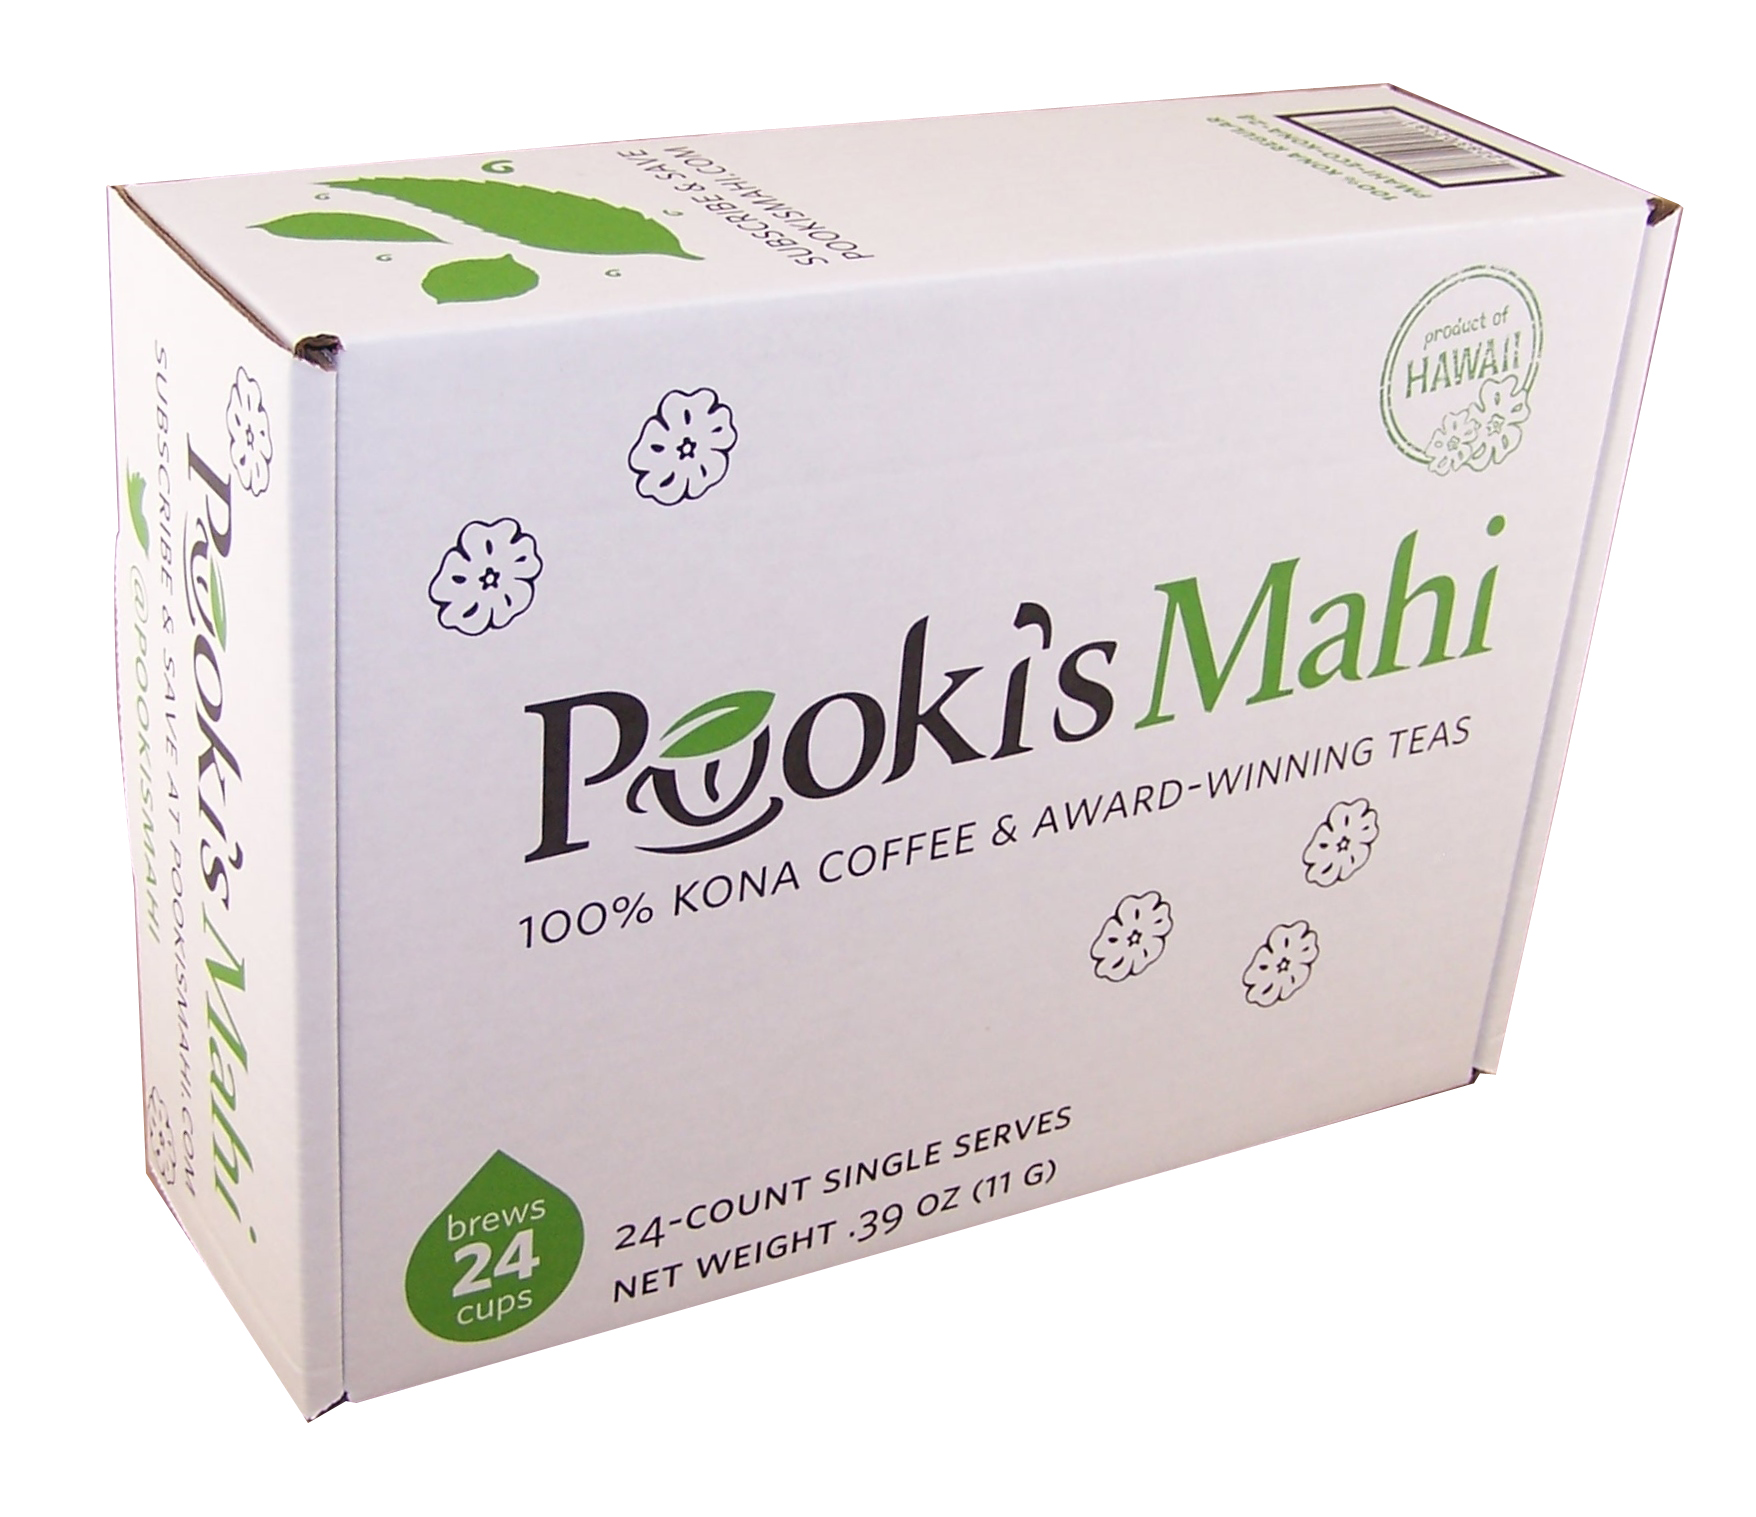 Pooki's Mahi's custom promotional products include a complimentary ecommerce ship ready box.